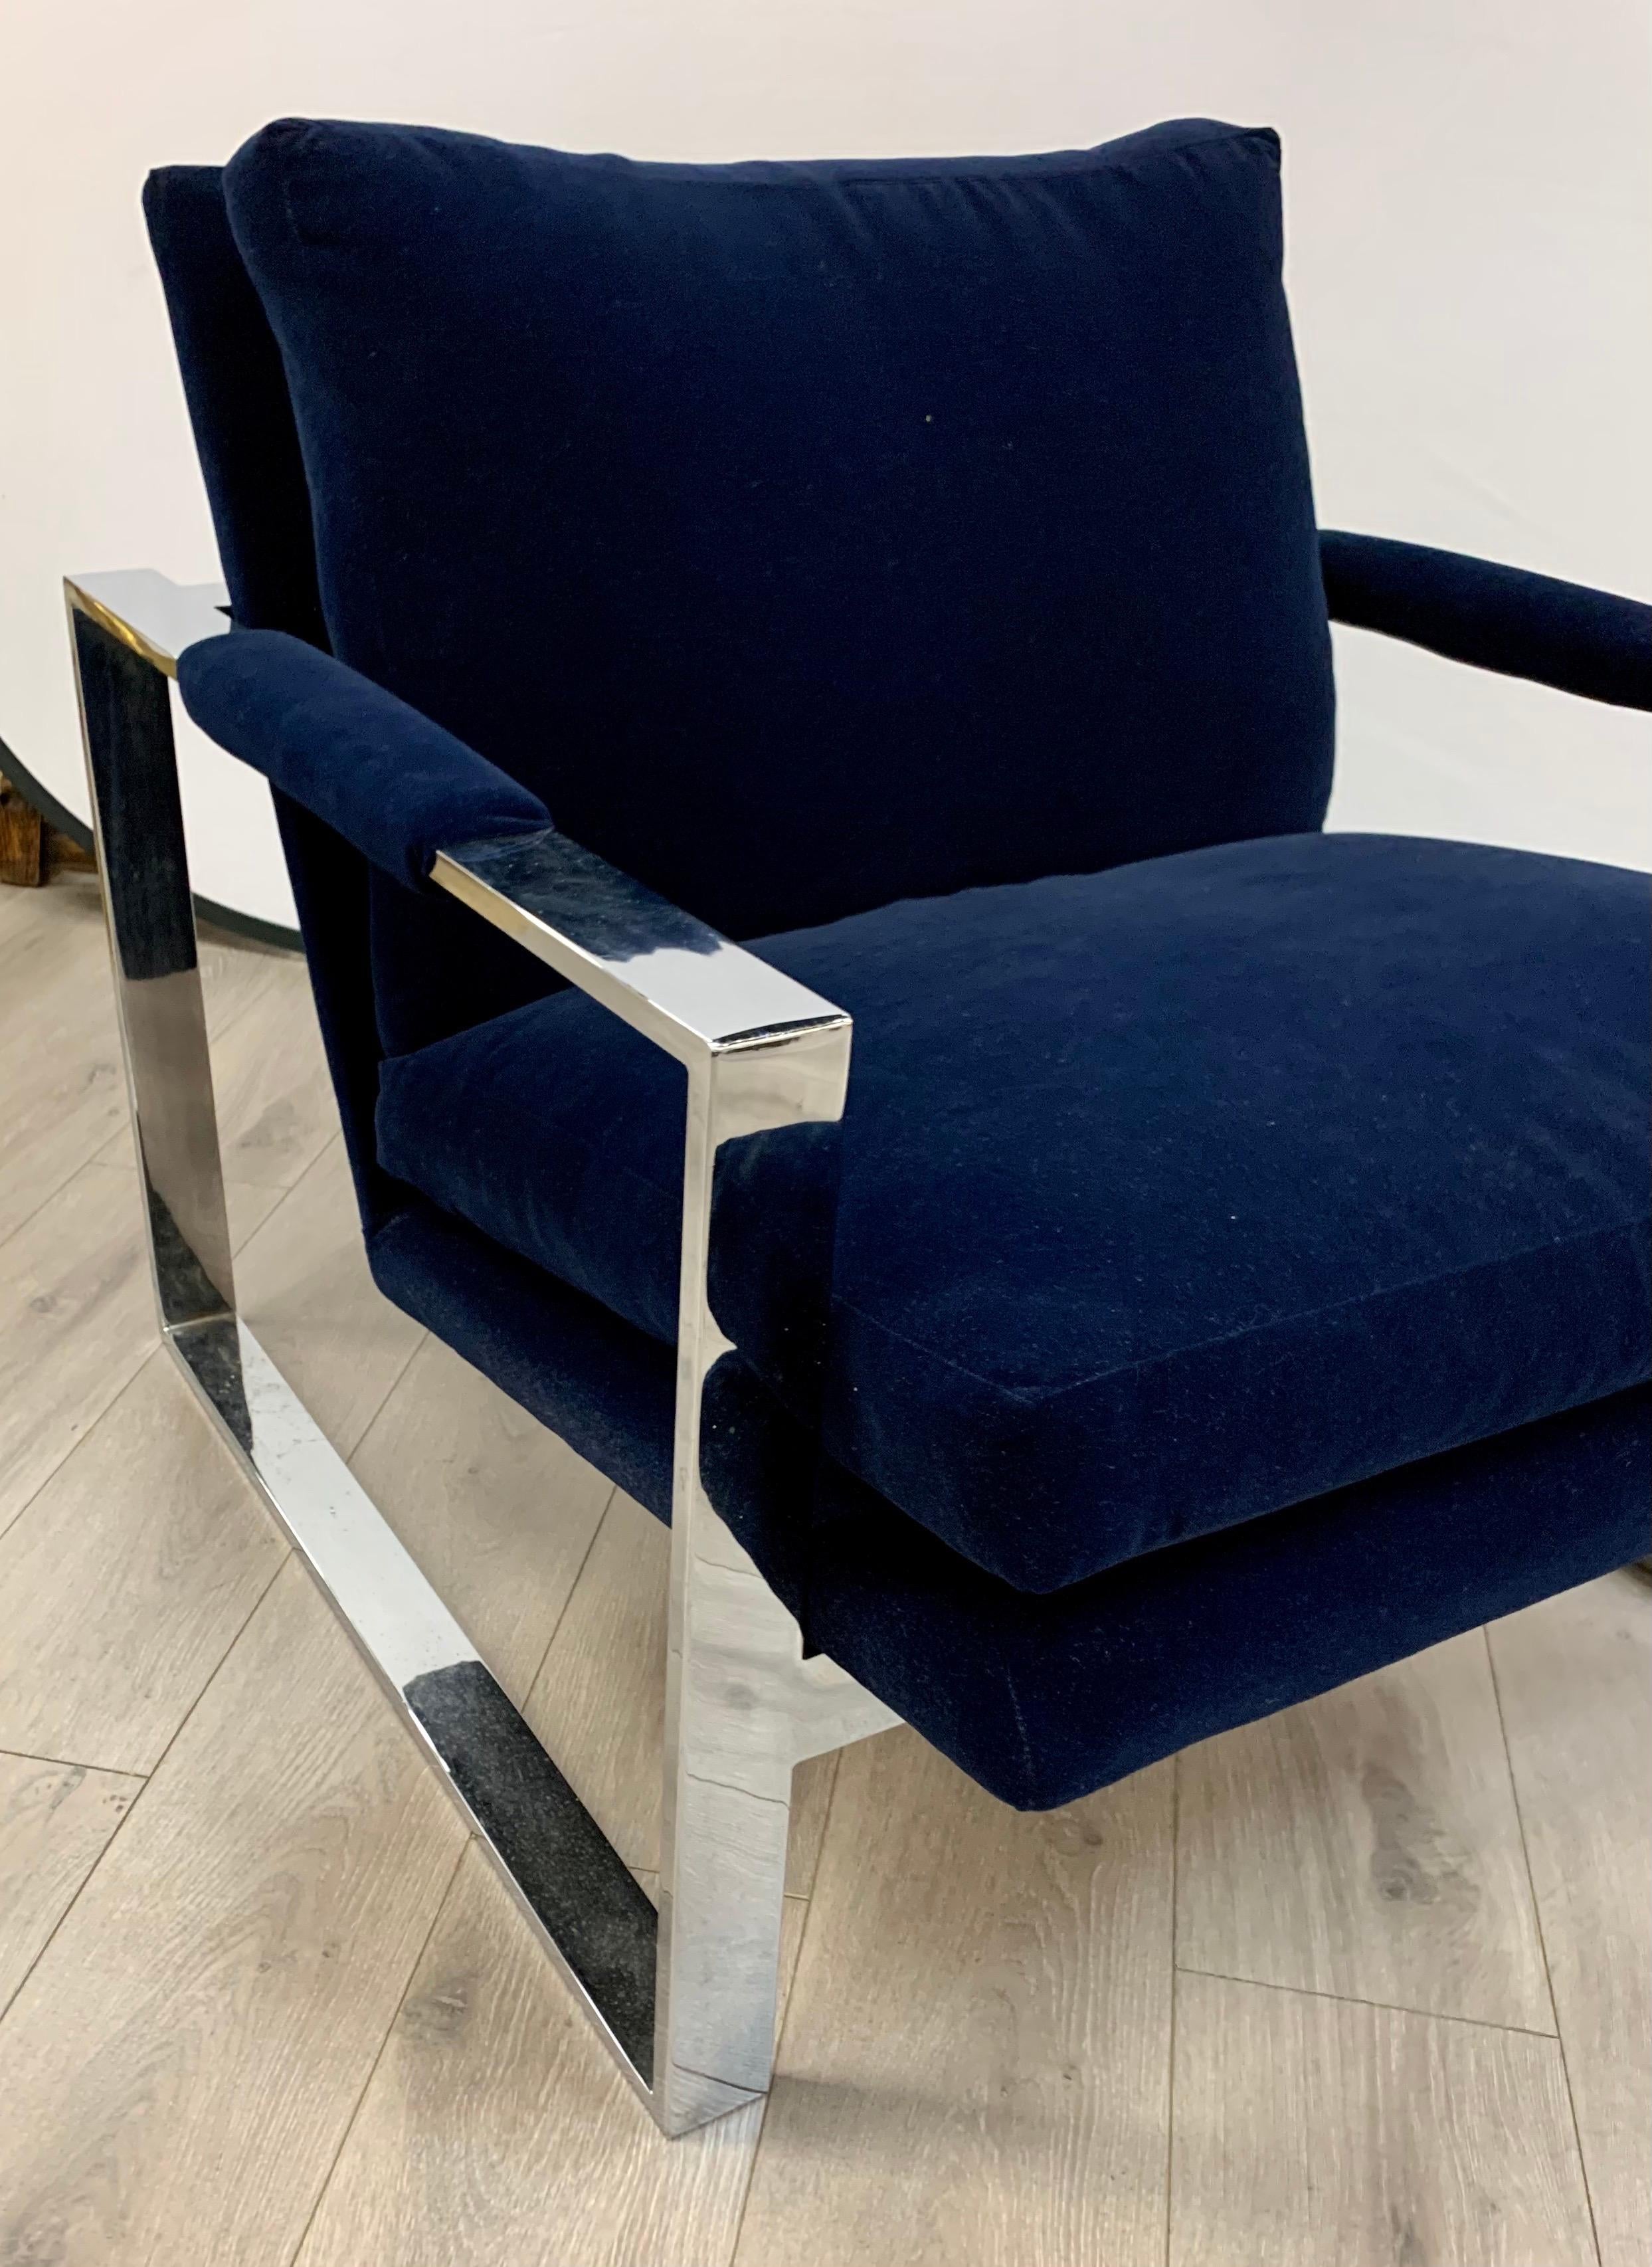 American Thayer Coggin Mid-Century Newly Upholstered Navy Velvet Cantilever Cube Chair